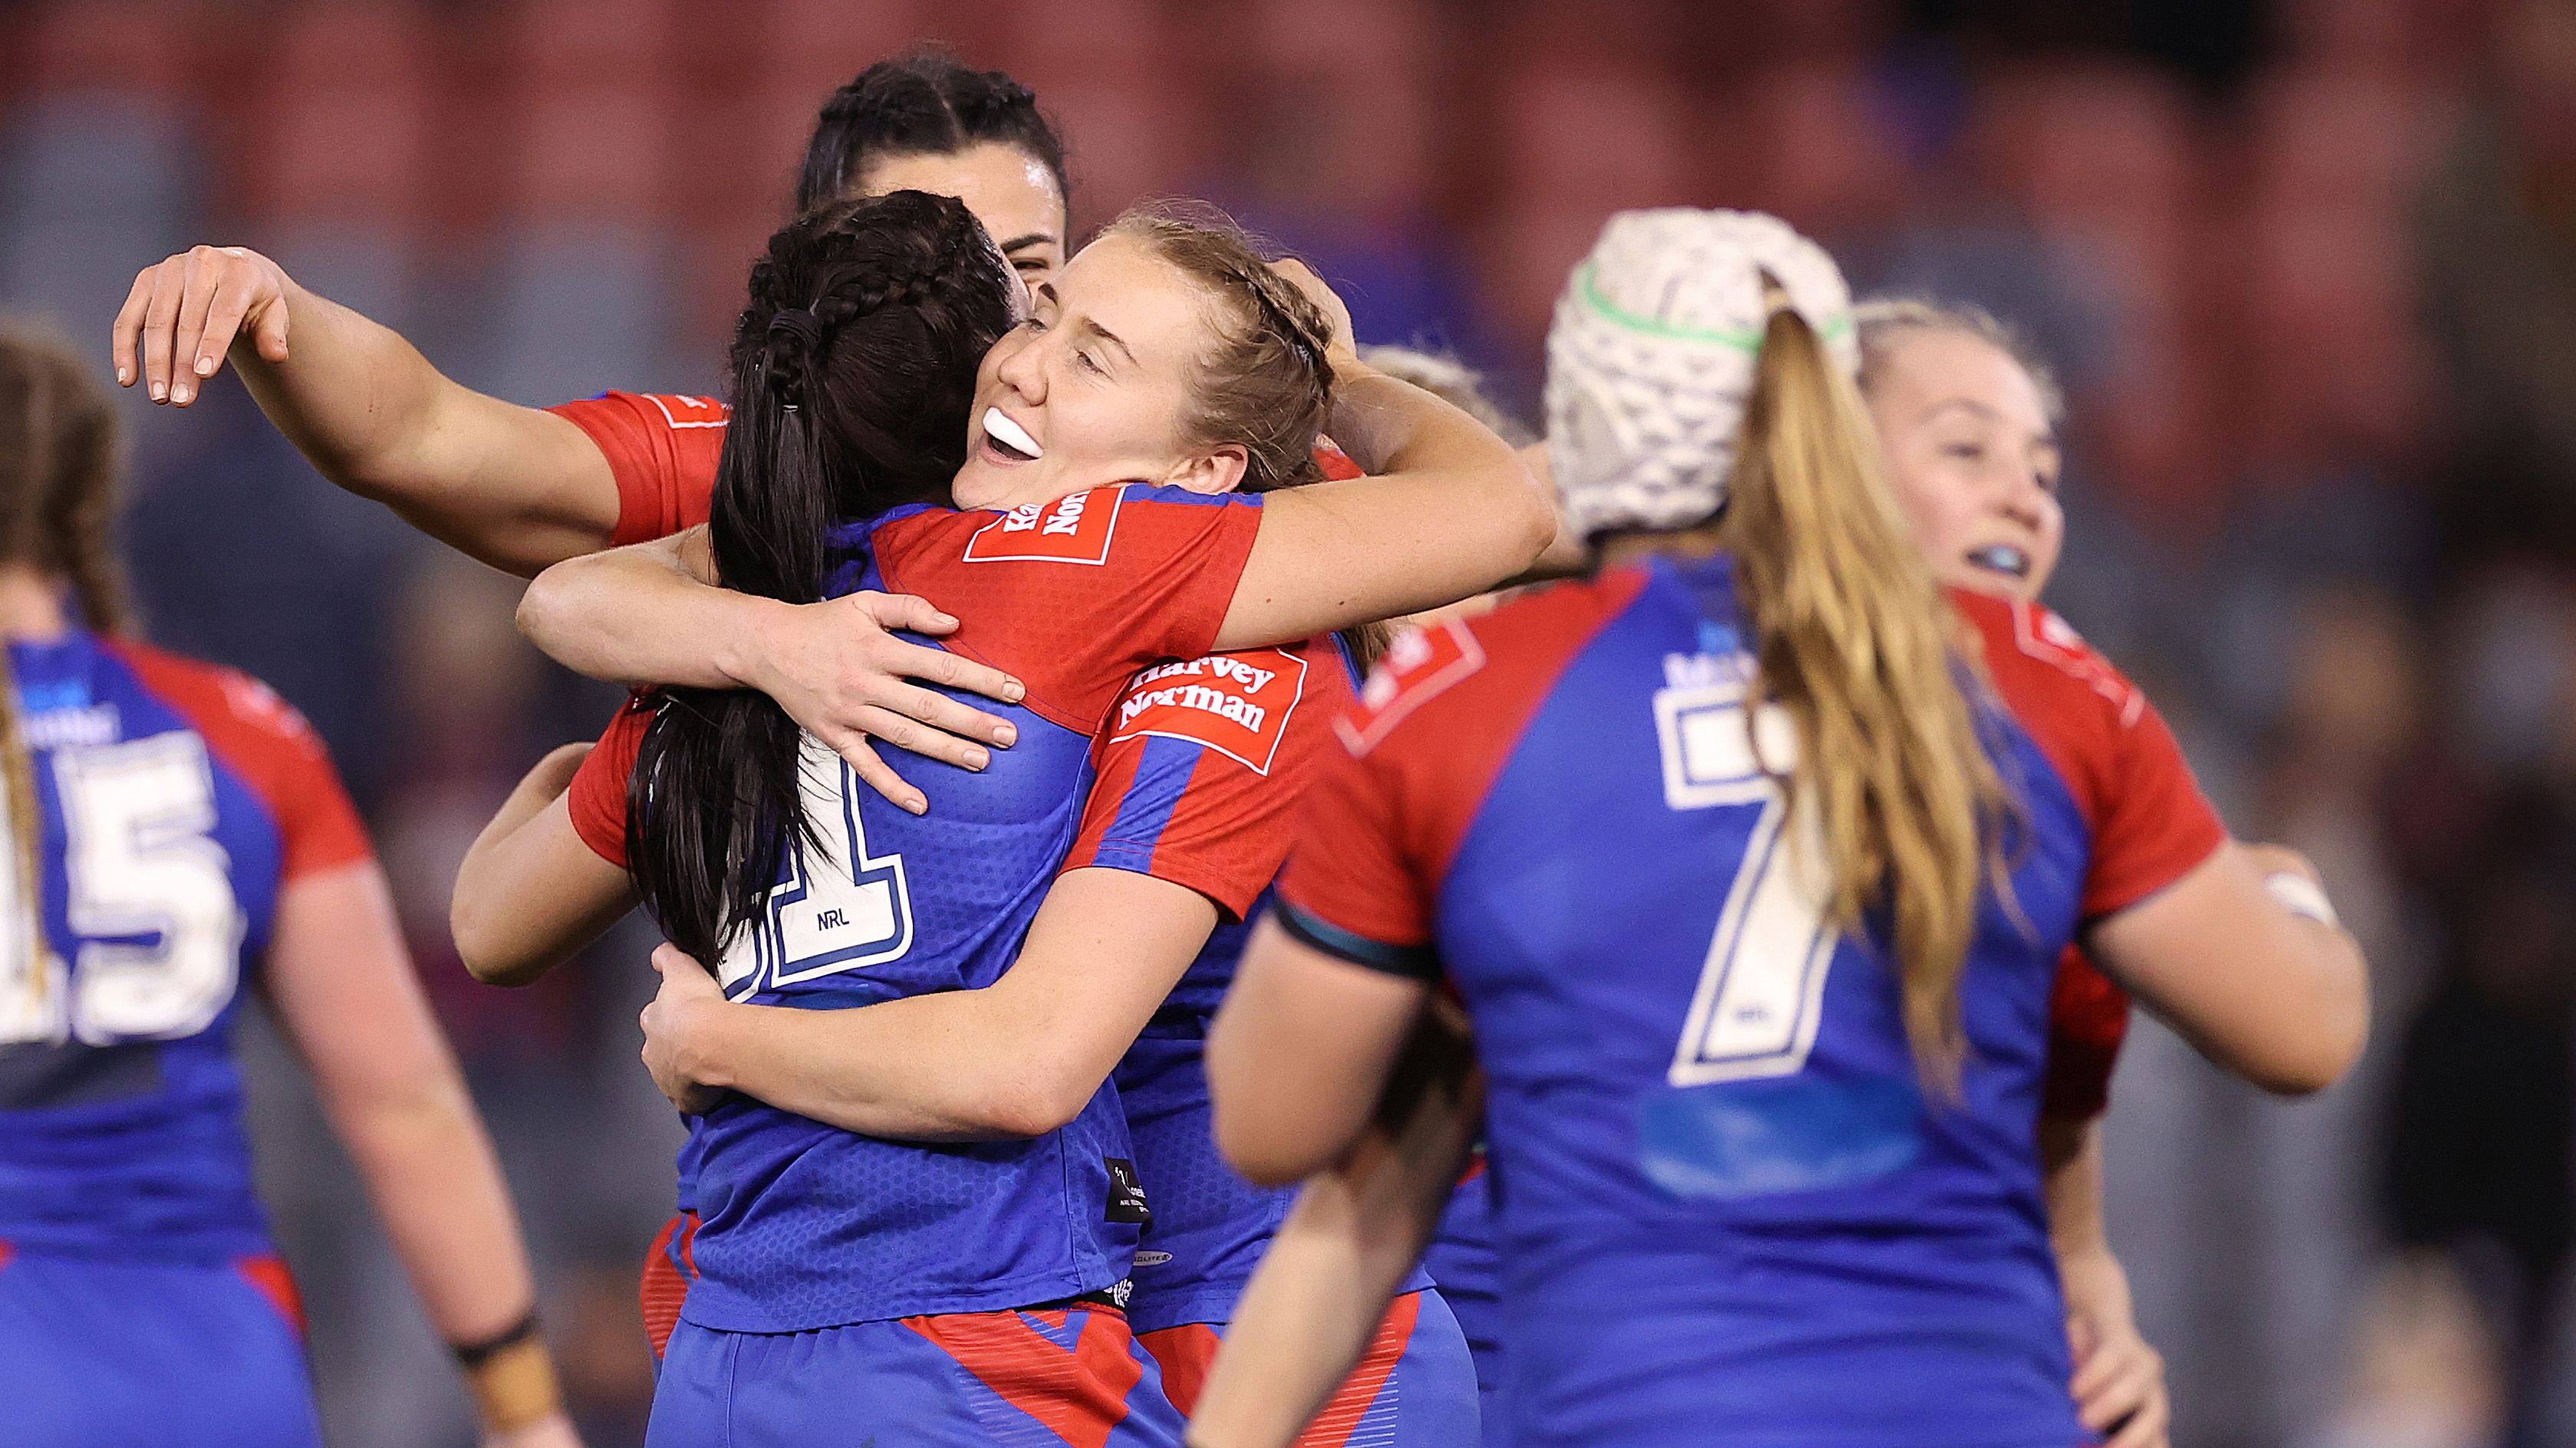 Knights players celebrate victory during the round one NRLW match between Newcastle Knights and Brisbane Broncos at McDonald Jones Stadium, on August 21, 2022, in Newcastle, Australia. (Photo by Cameron Spencer/Getty Images)